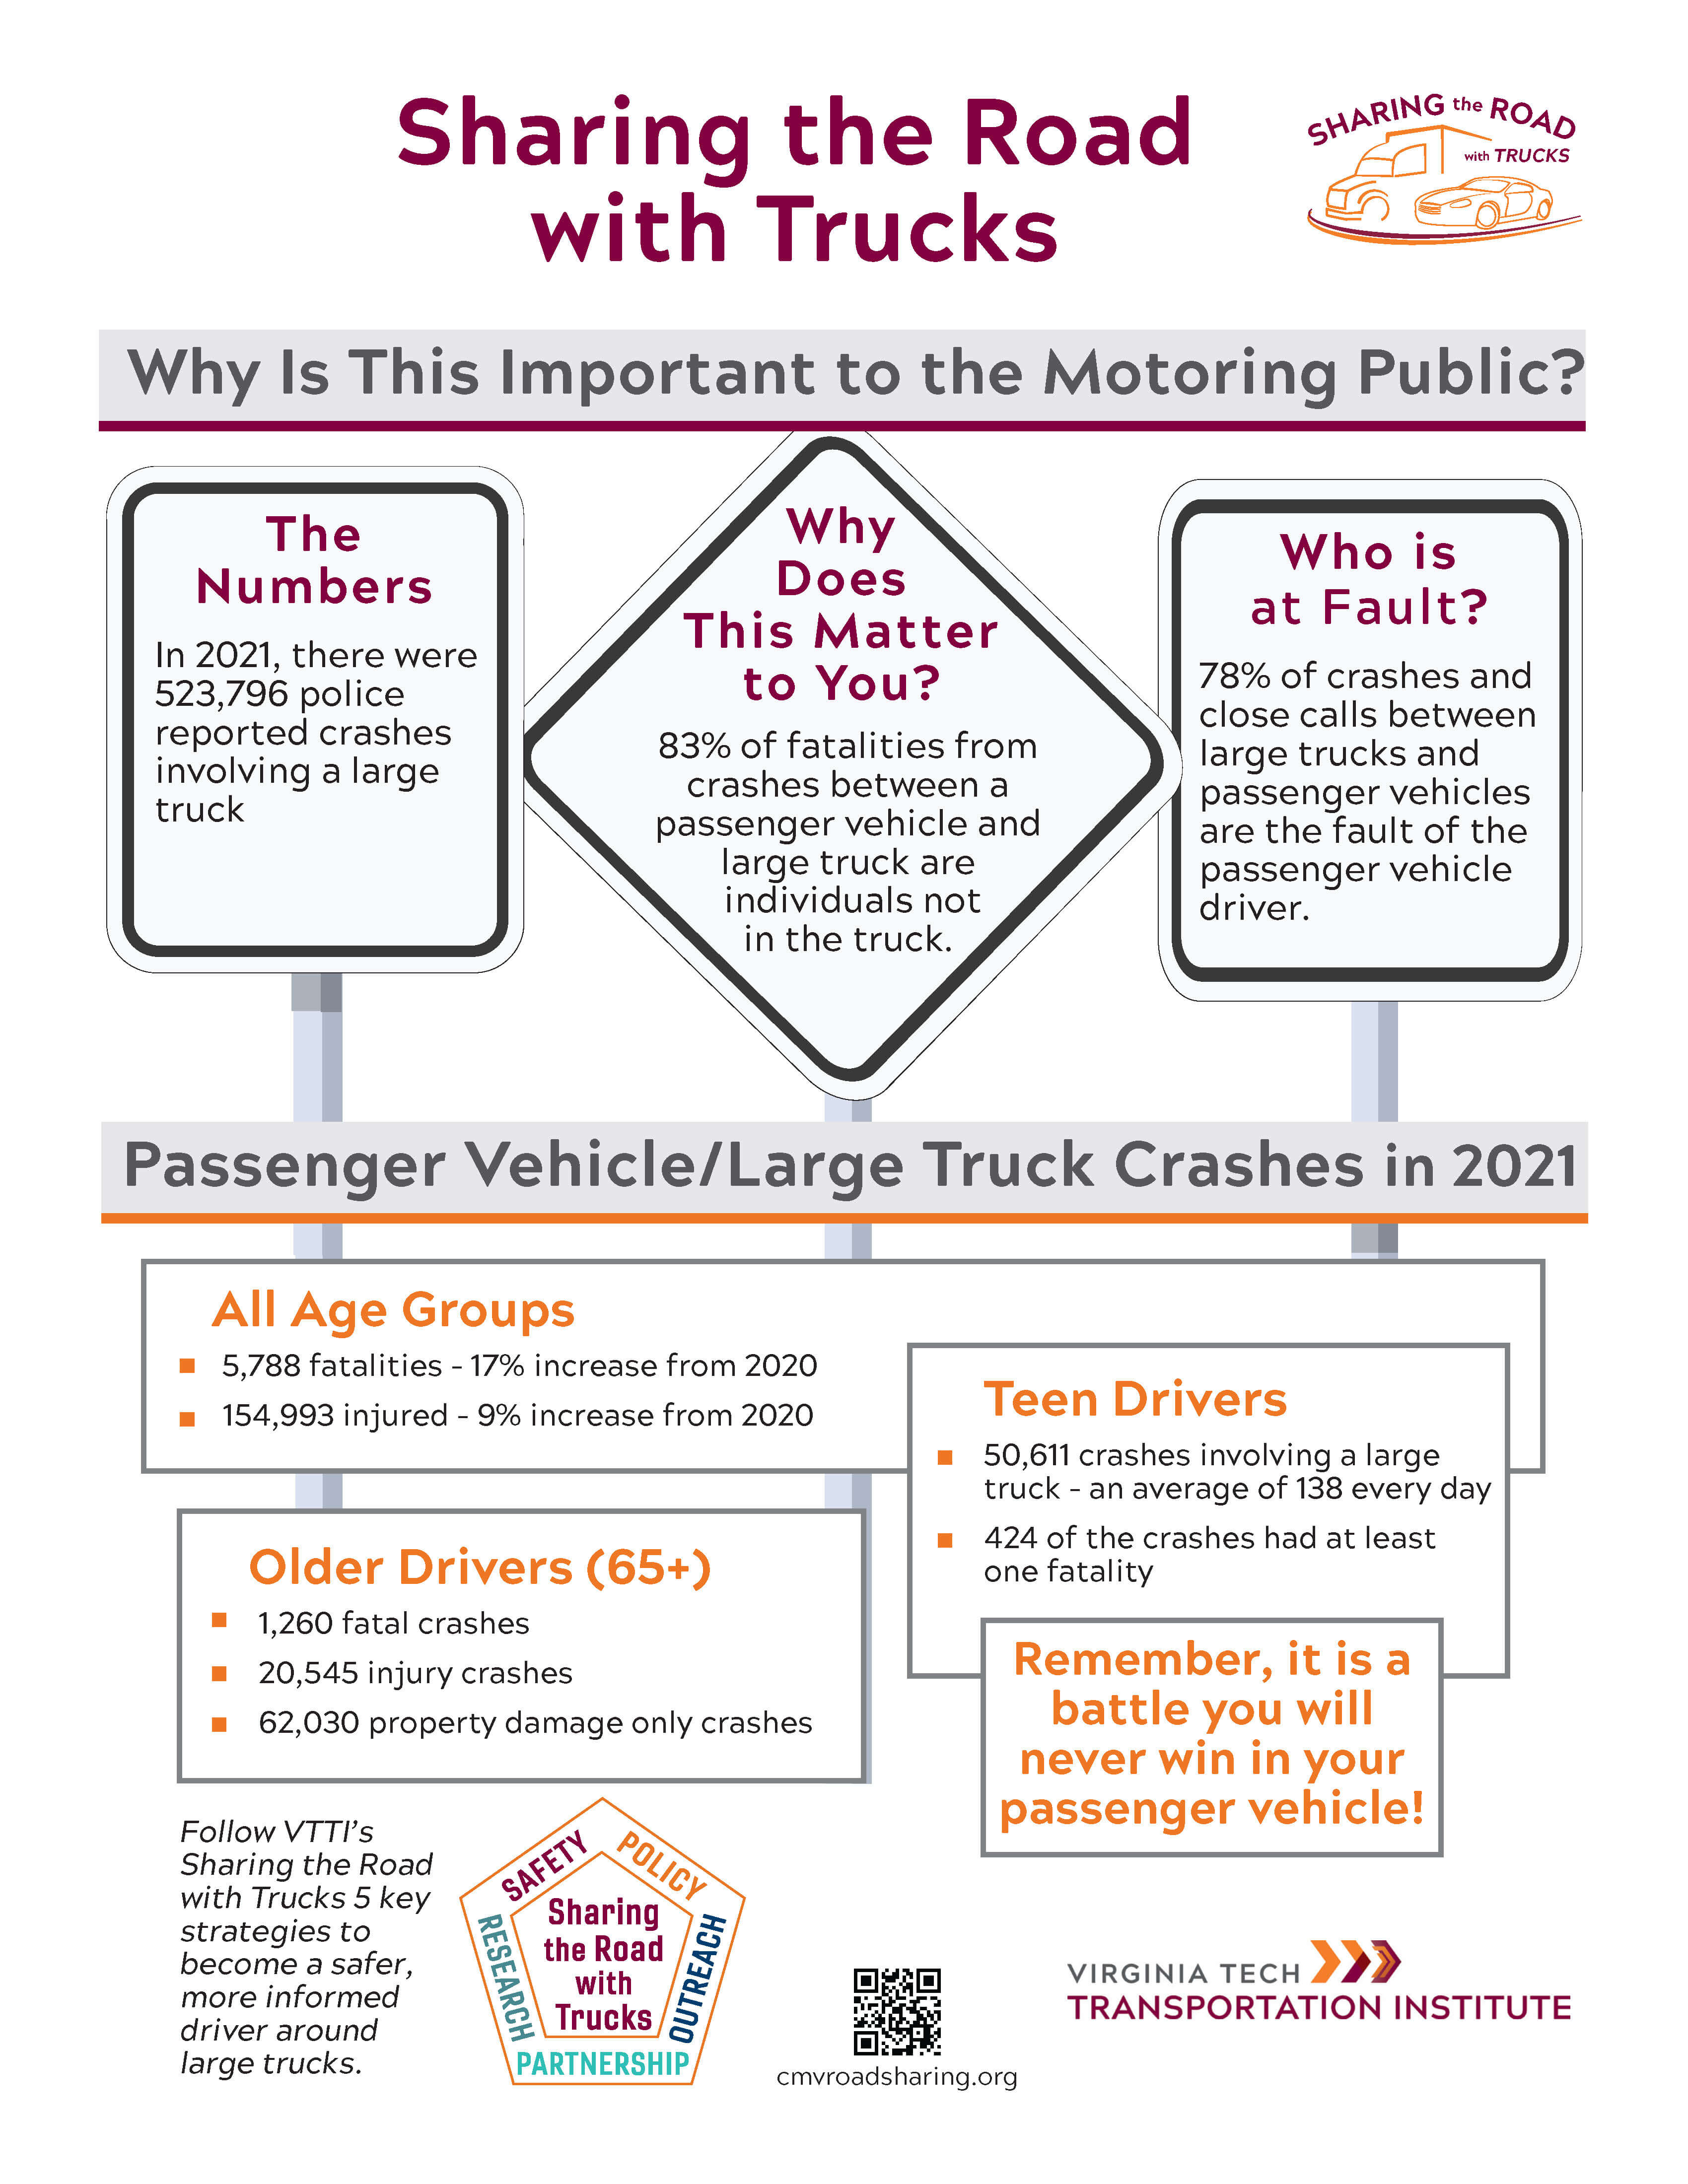 Thumbnail of a one-pager about the Sharing the Road with Trucks program